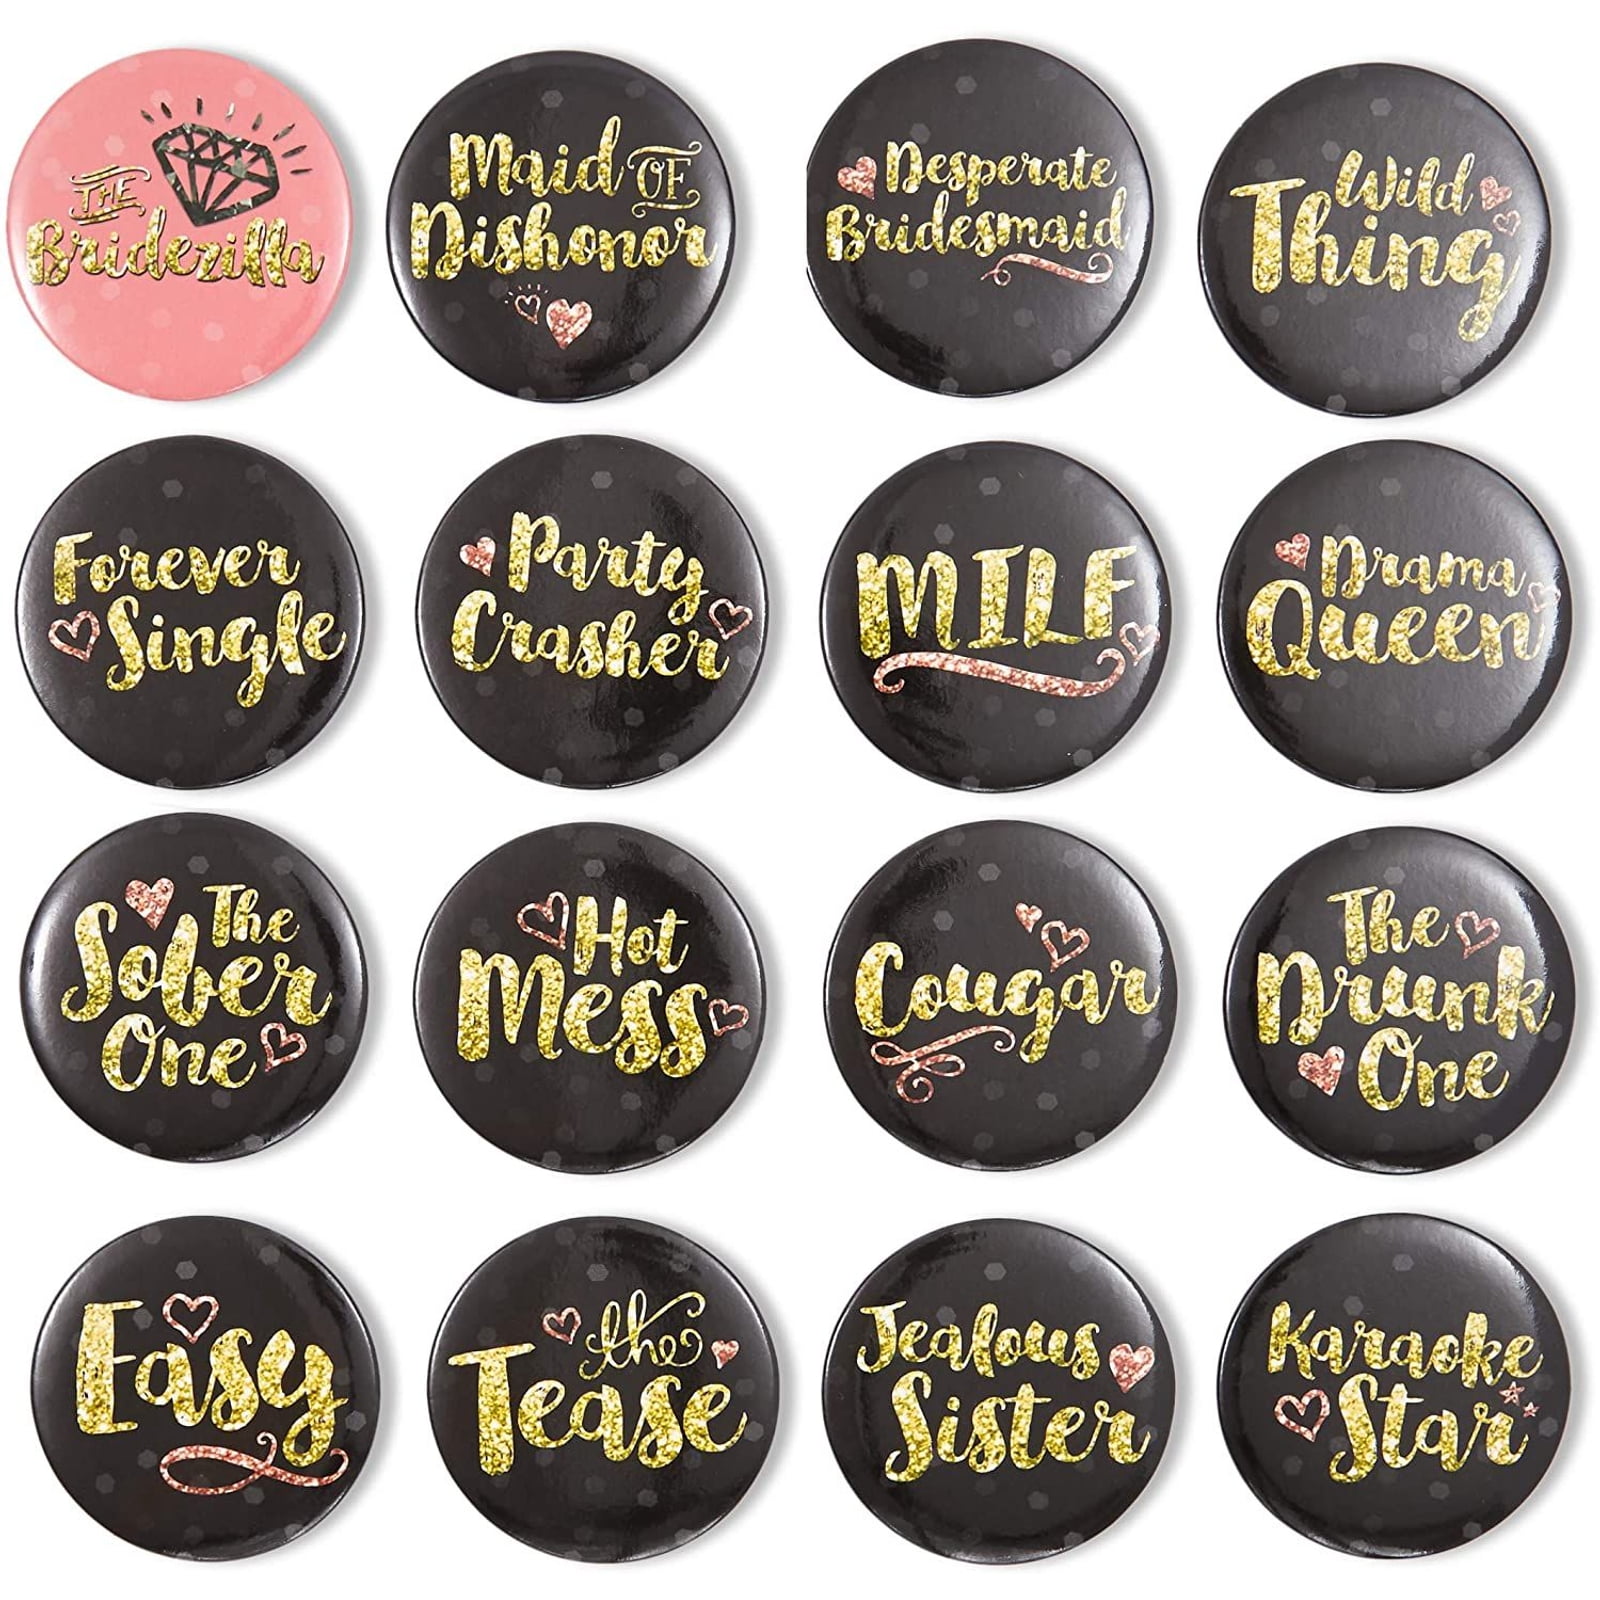 Family Wedding Buttons Pins Metal Bridal Shower Bride Groom Silver Party Favors 